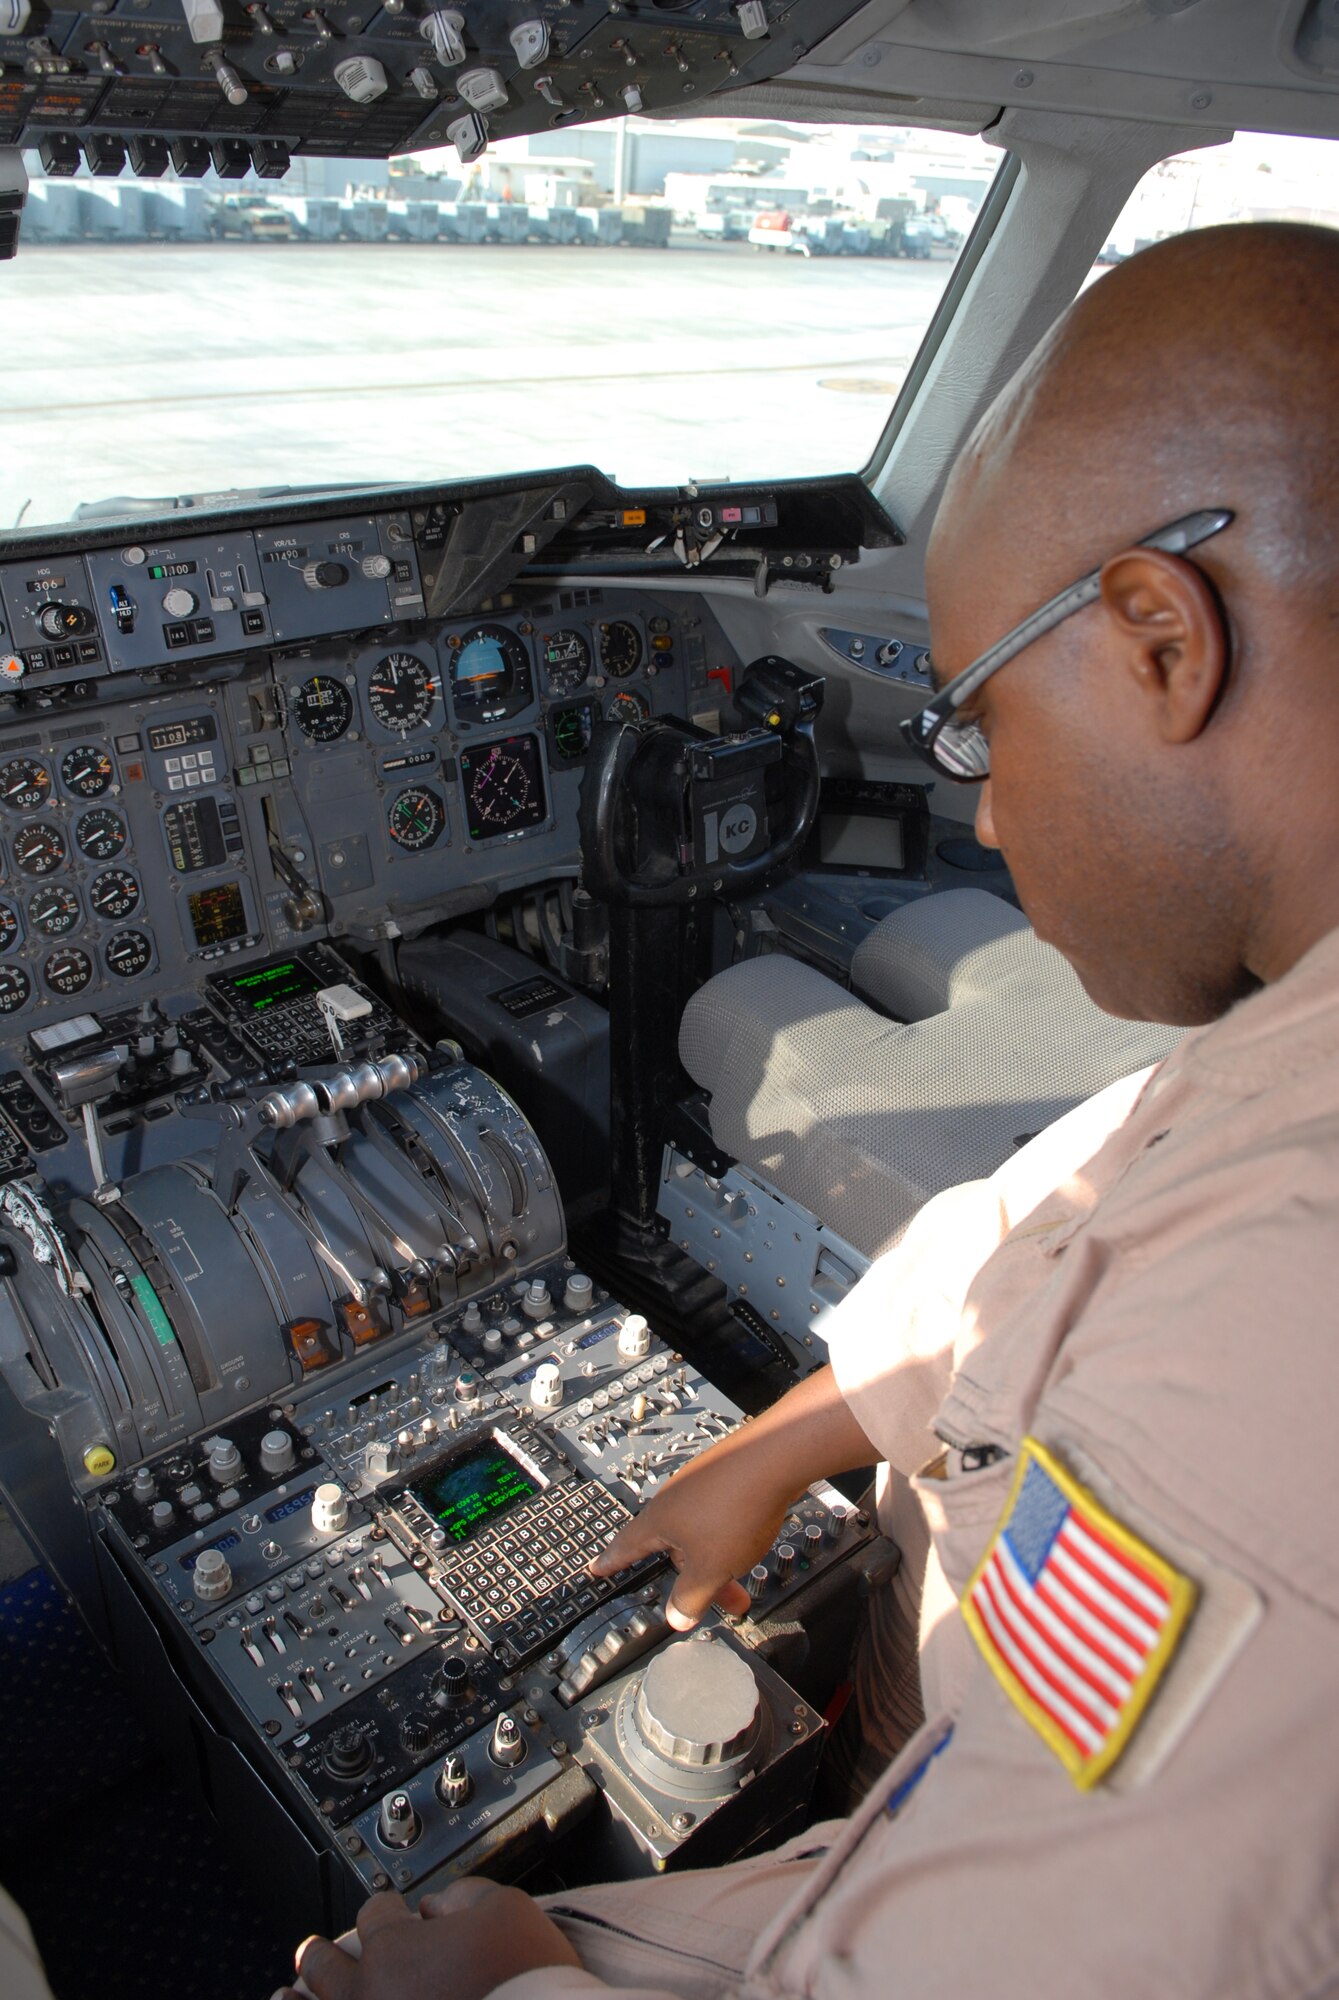 SOUTHWEST ASIA - Master Sgt. Terence Jackson, 908 Expeditionary Air Refueling Squadron, flight engineer, performs the pre-flight inspection on the Flight Management System Control Display Unit, Jan 23. Sergeant Jackson reached a milestone of 10,000 flight hours. Sergeant Jackson is deployed from the 305th Air Mobility Wing, McGuire AFB and is from Grand Rapids, Mich. (U.S. Air Force photo by Captain Jennifer M. Pearson) (Released)